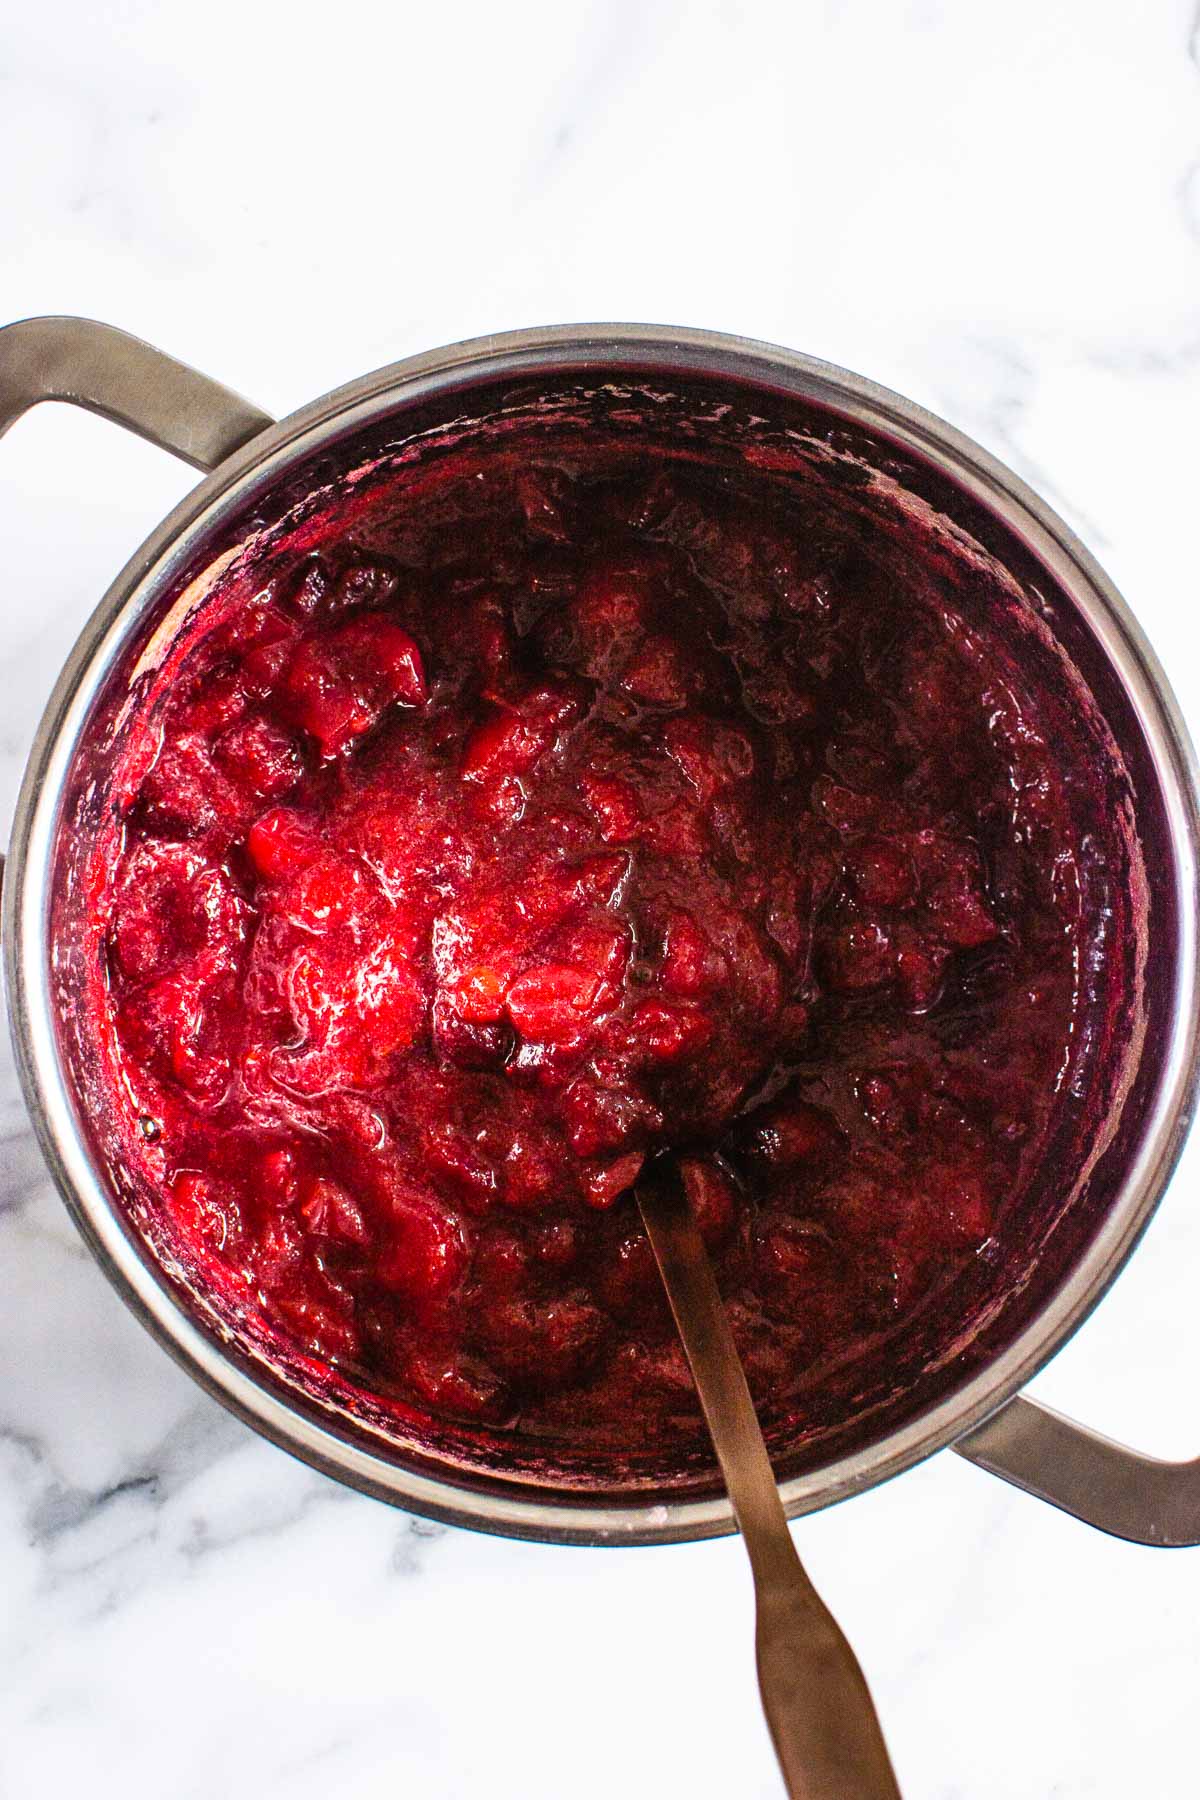 Cranberry sauce in a saucepan with ladle.